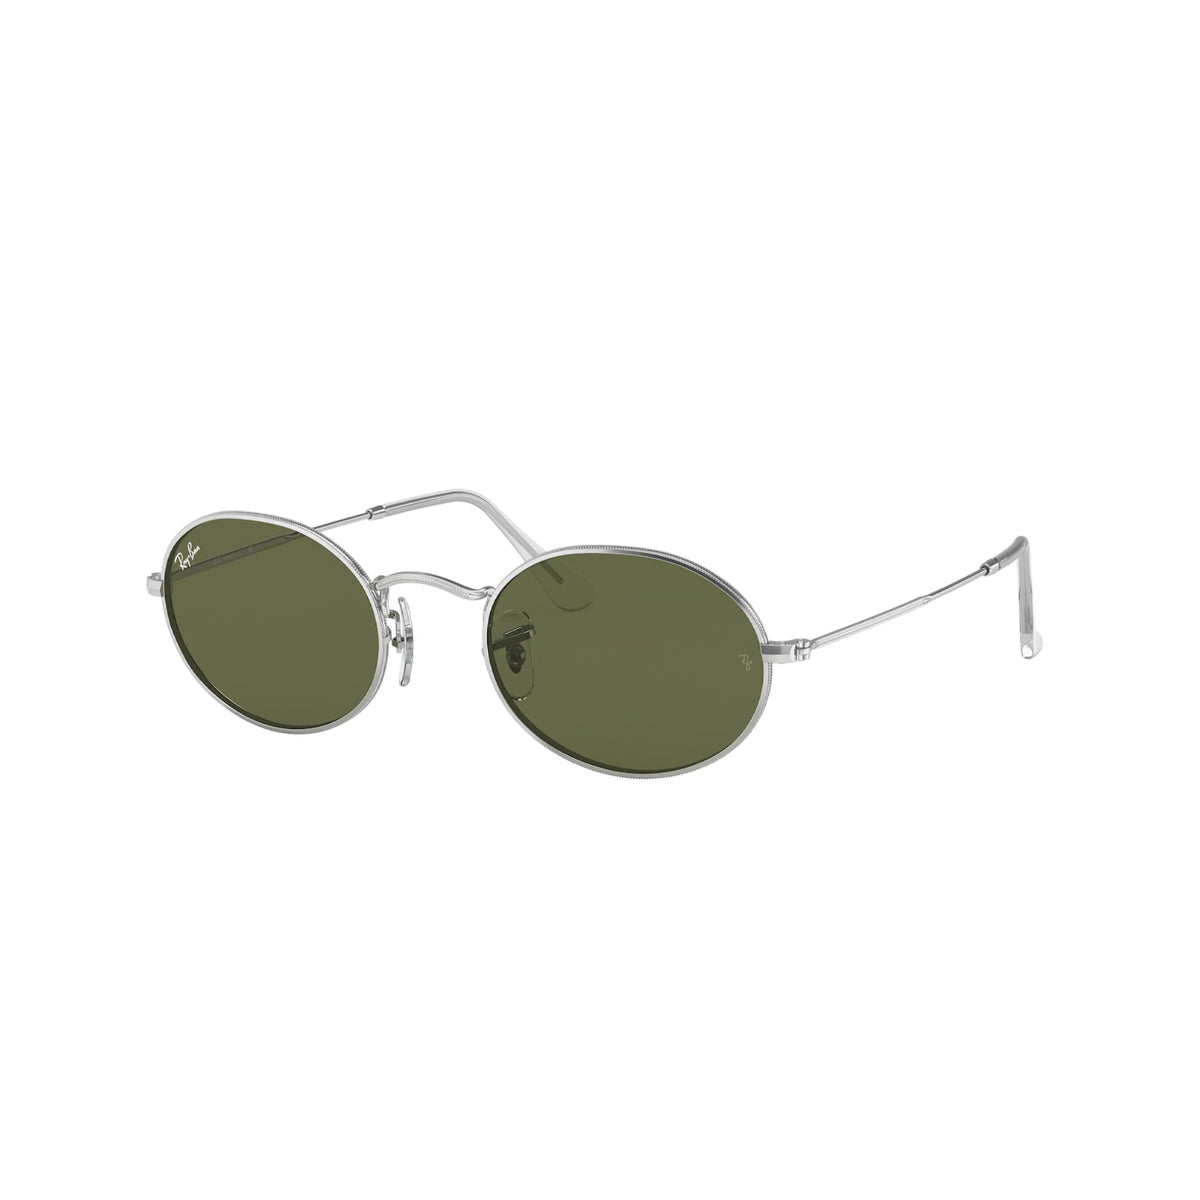 Ray-Ban Unisex Sunglasses Oval Silver Bottle Green Metal Metal  0RB3547 91984E 51